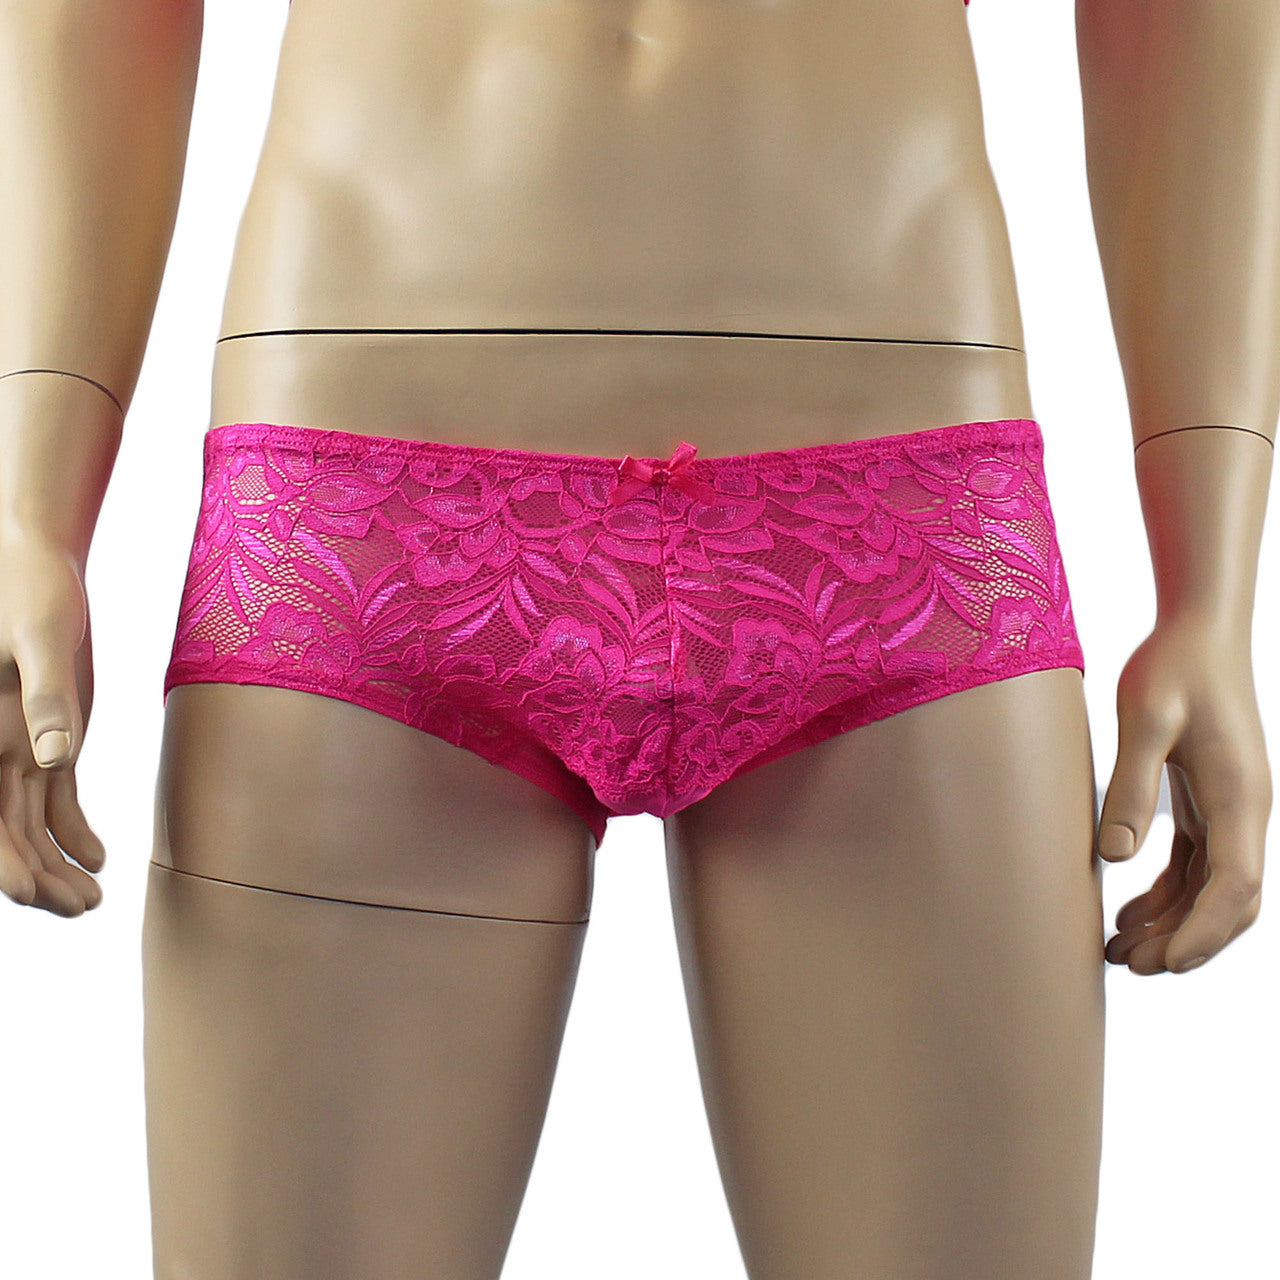 Mens Sexy Lace Camisole Top and  Panty Brief (pink plus other colours)